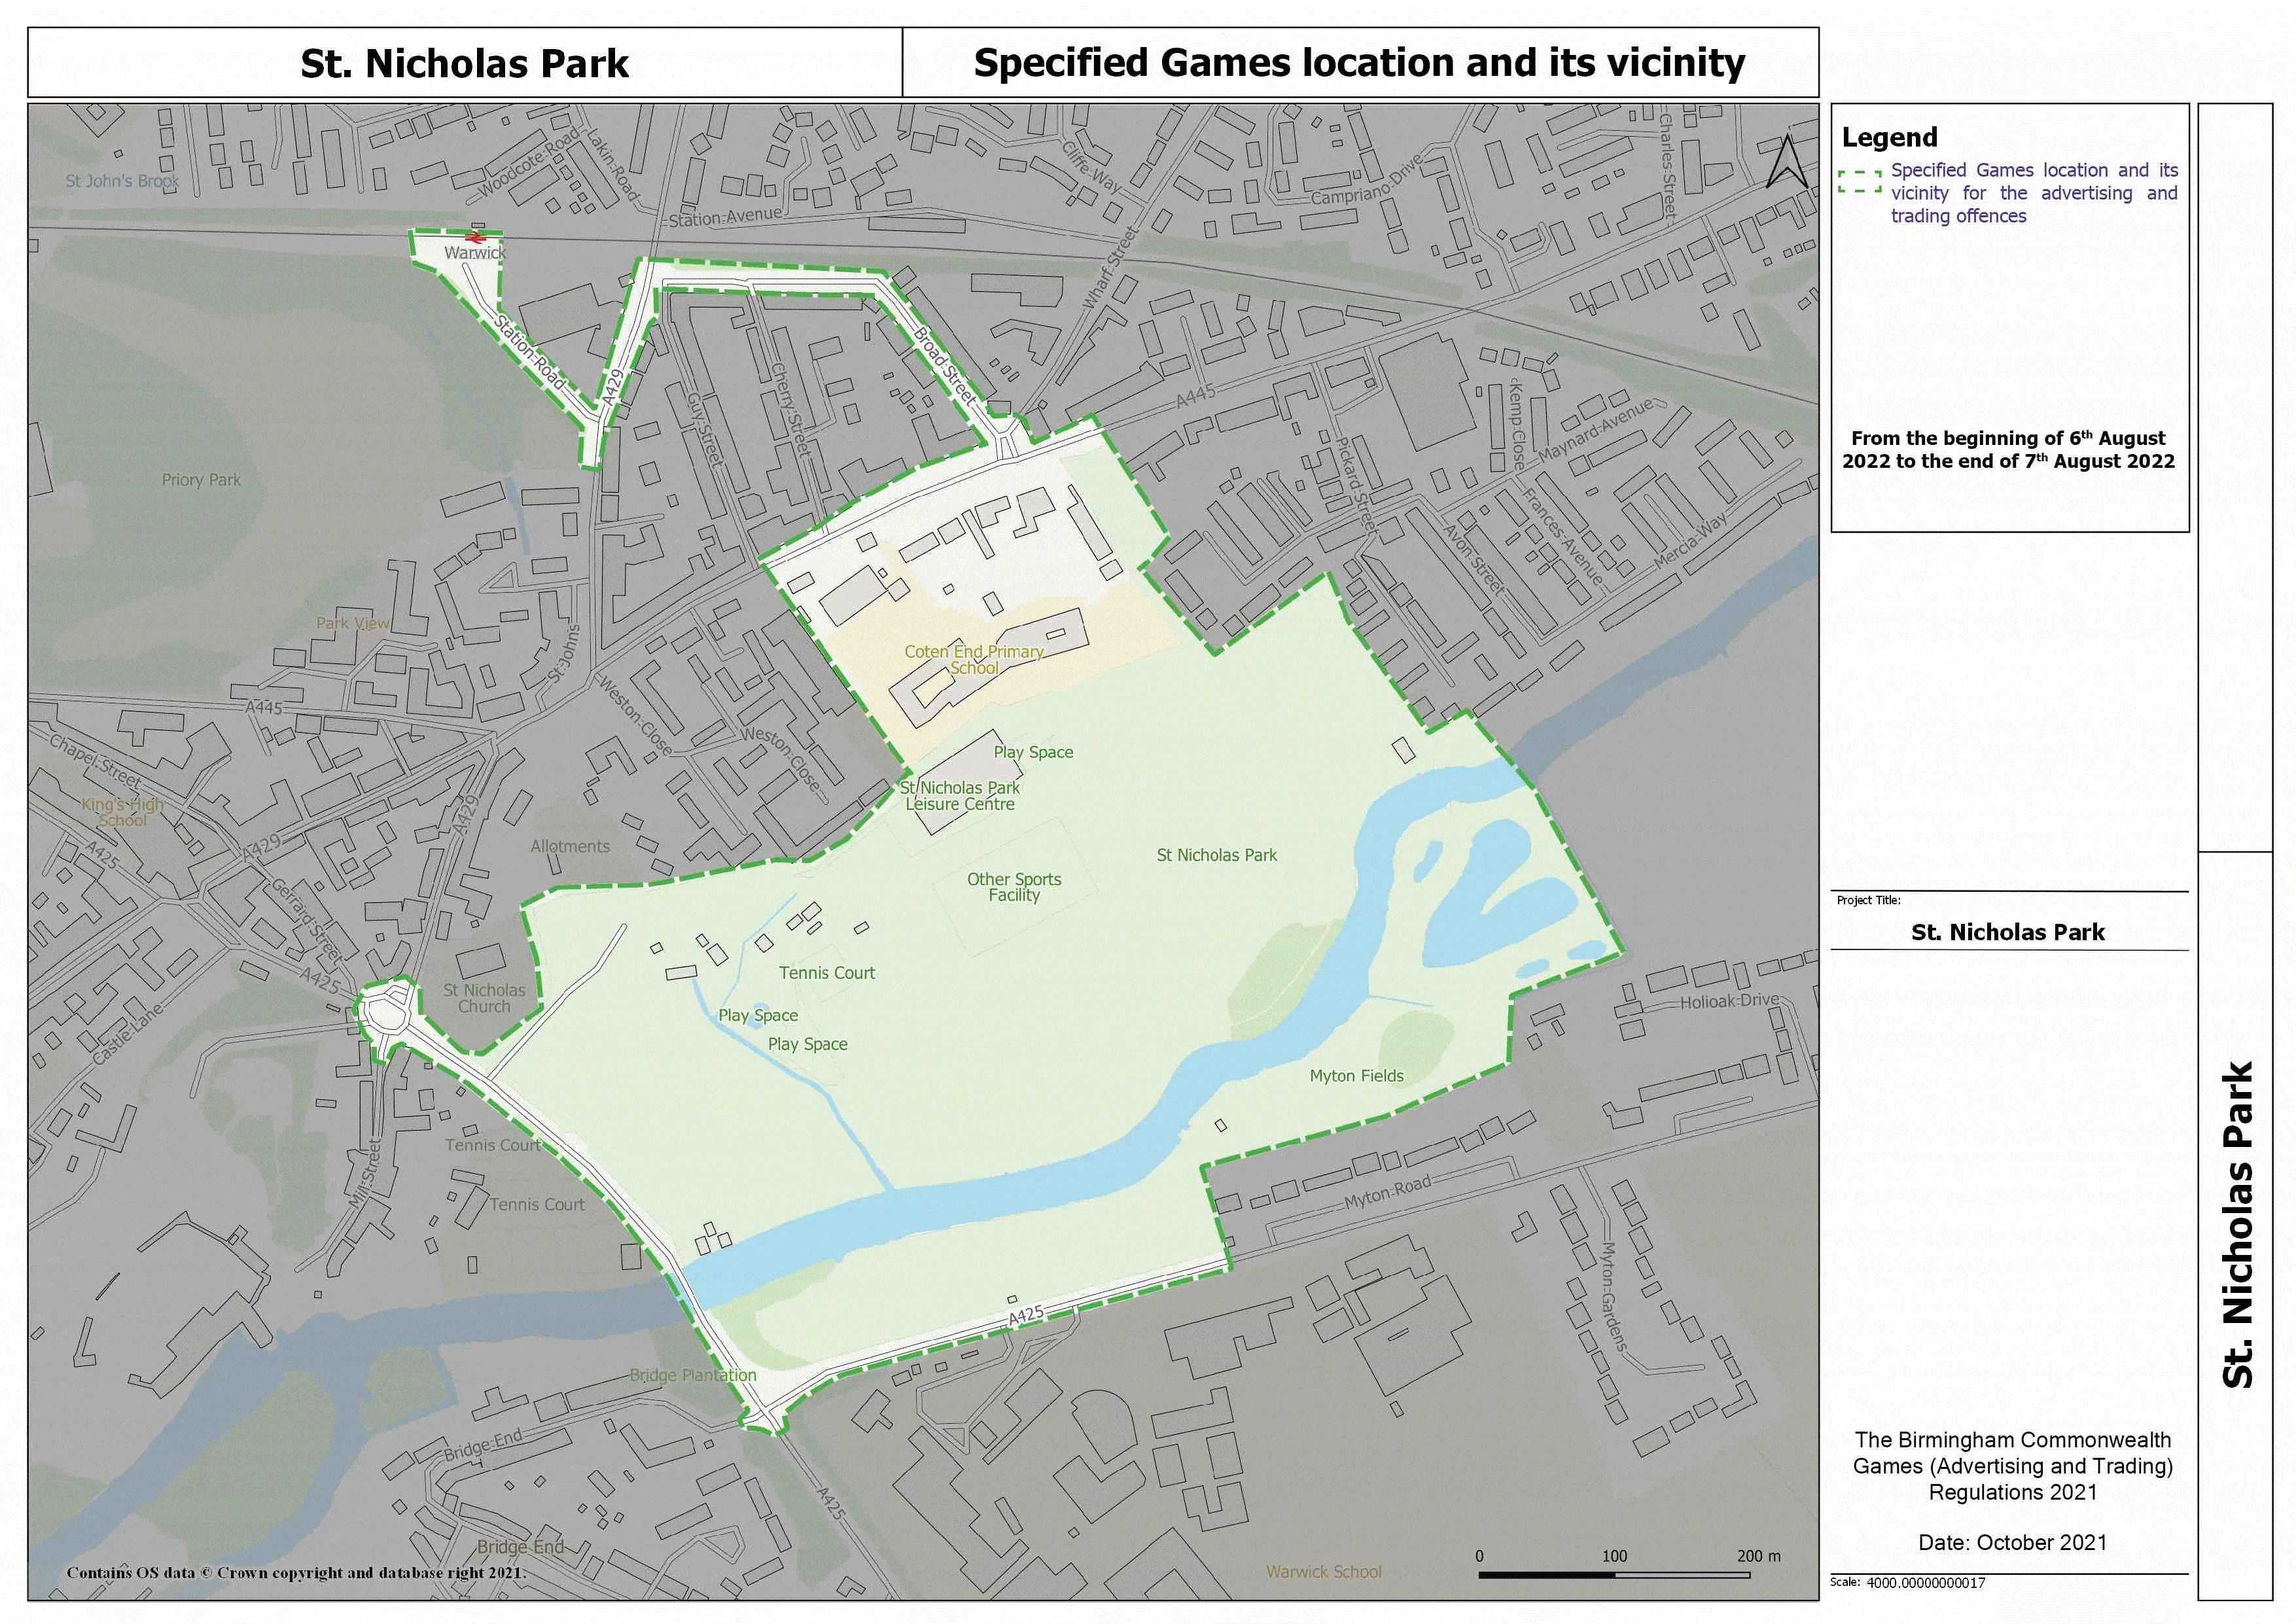 Map titled "St. Nicholas Park". One of the relevant maps for the purposes of the Birmingham Commonwealth Games (Advertising and Trading) Regulations 2021.
